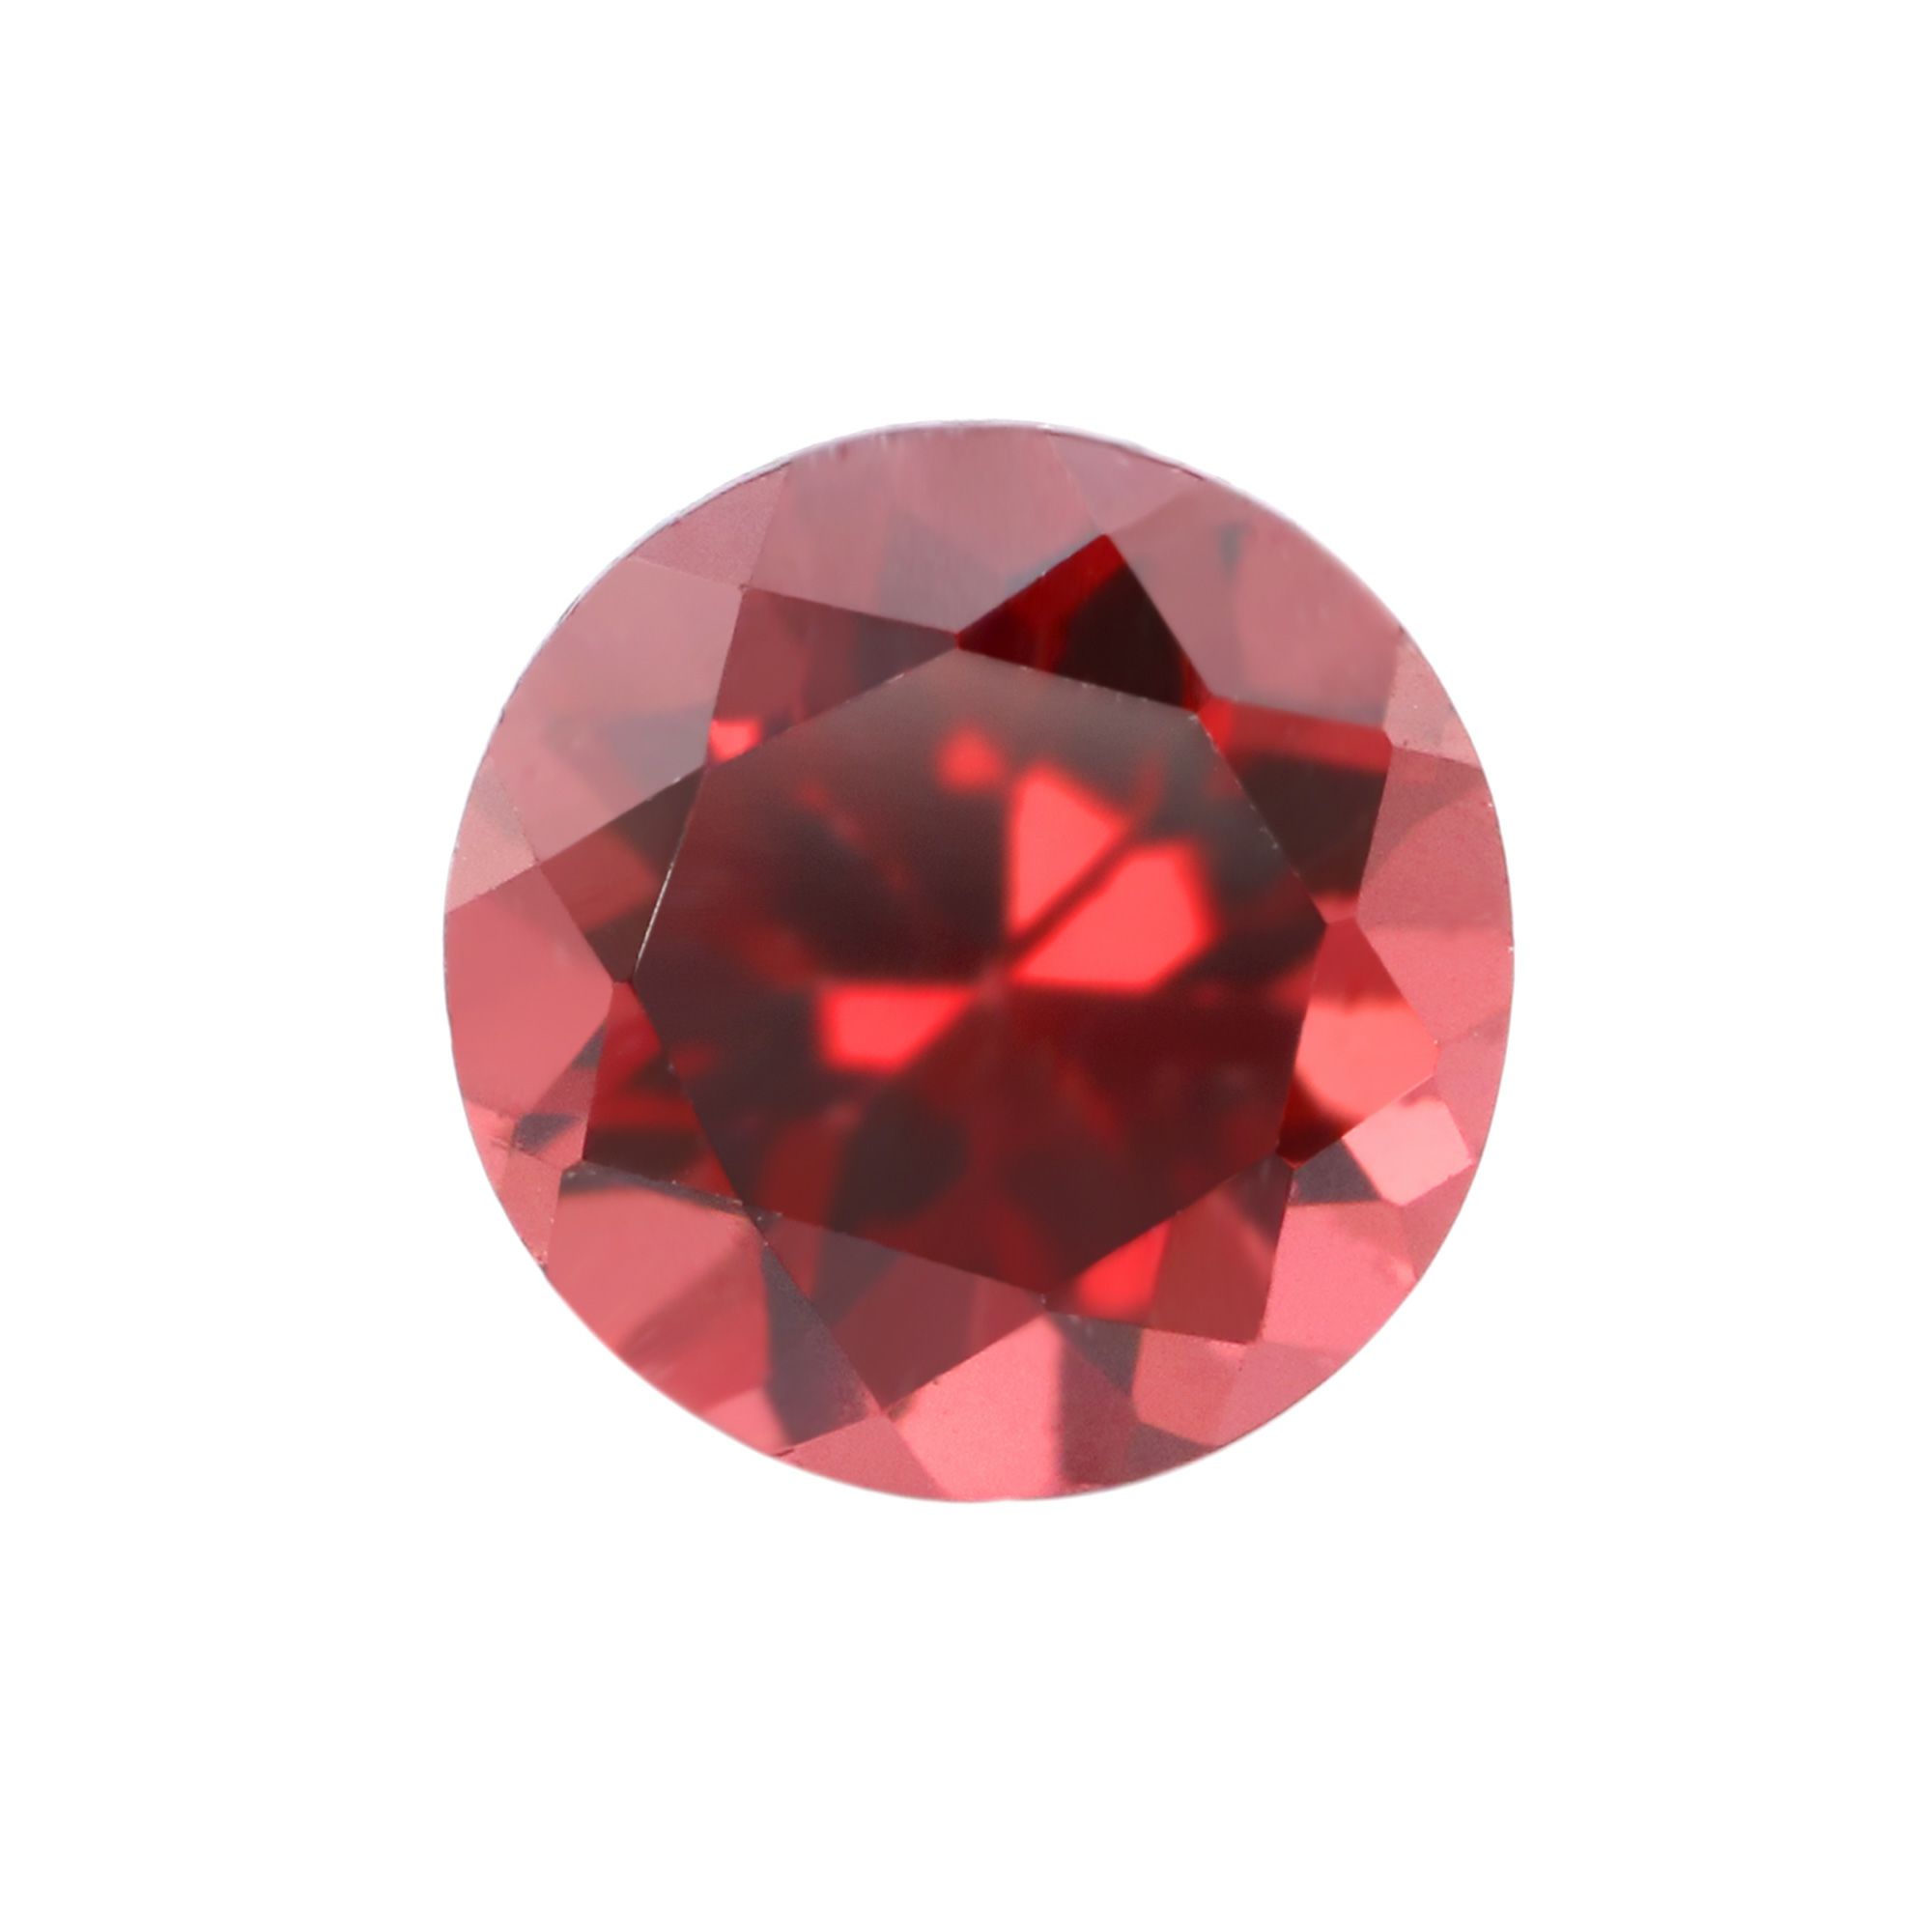 1Pcs Round Red Garnet January Birthstone Faceted Cut Loose Gemstone Nature Semi Precious Stone DIY Jewelry Supplies 4110168 - Click Image to Close